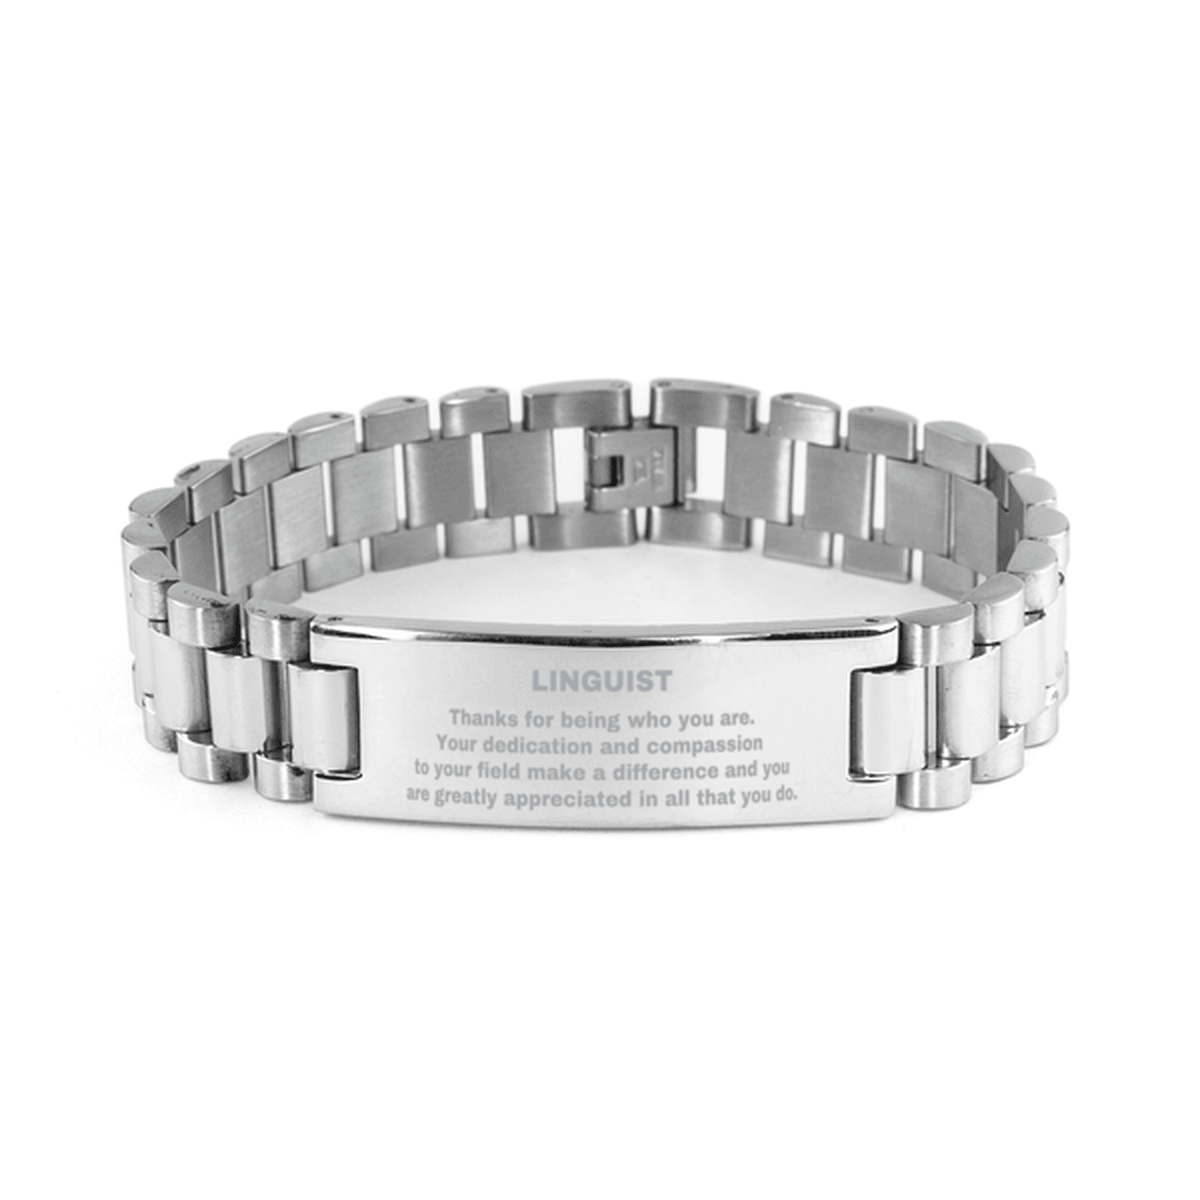 Linguist Ladder Stainless Steel Engraved Bracelet - Thanks for being who you are - Birthday Christmas Jewelry Gifts Coworkers Colleague Boss - Mallard Moon Gift Shop